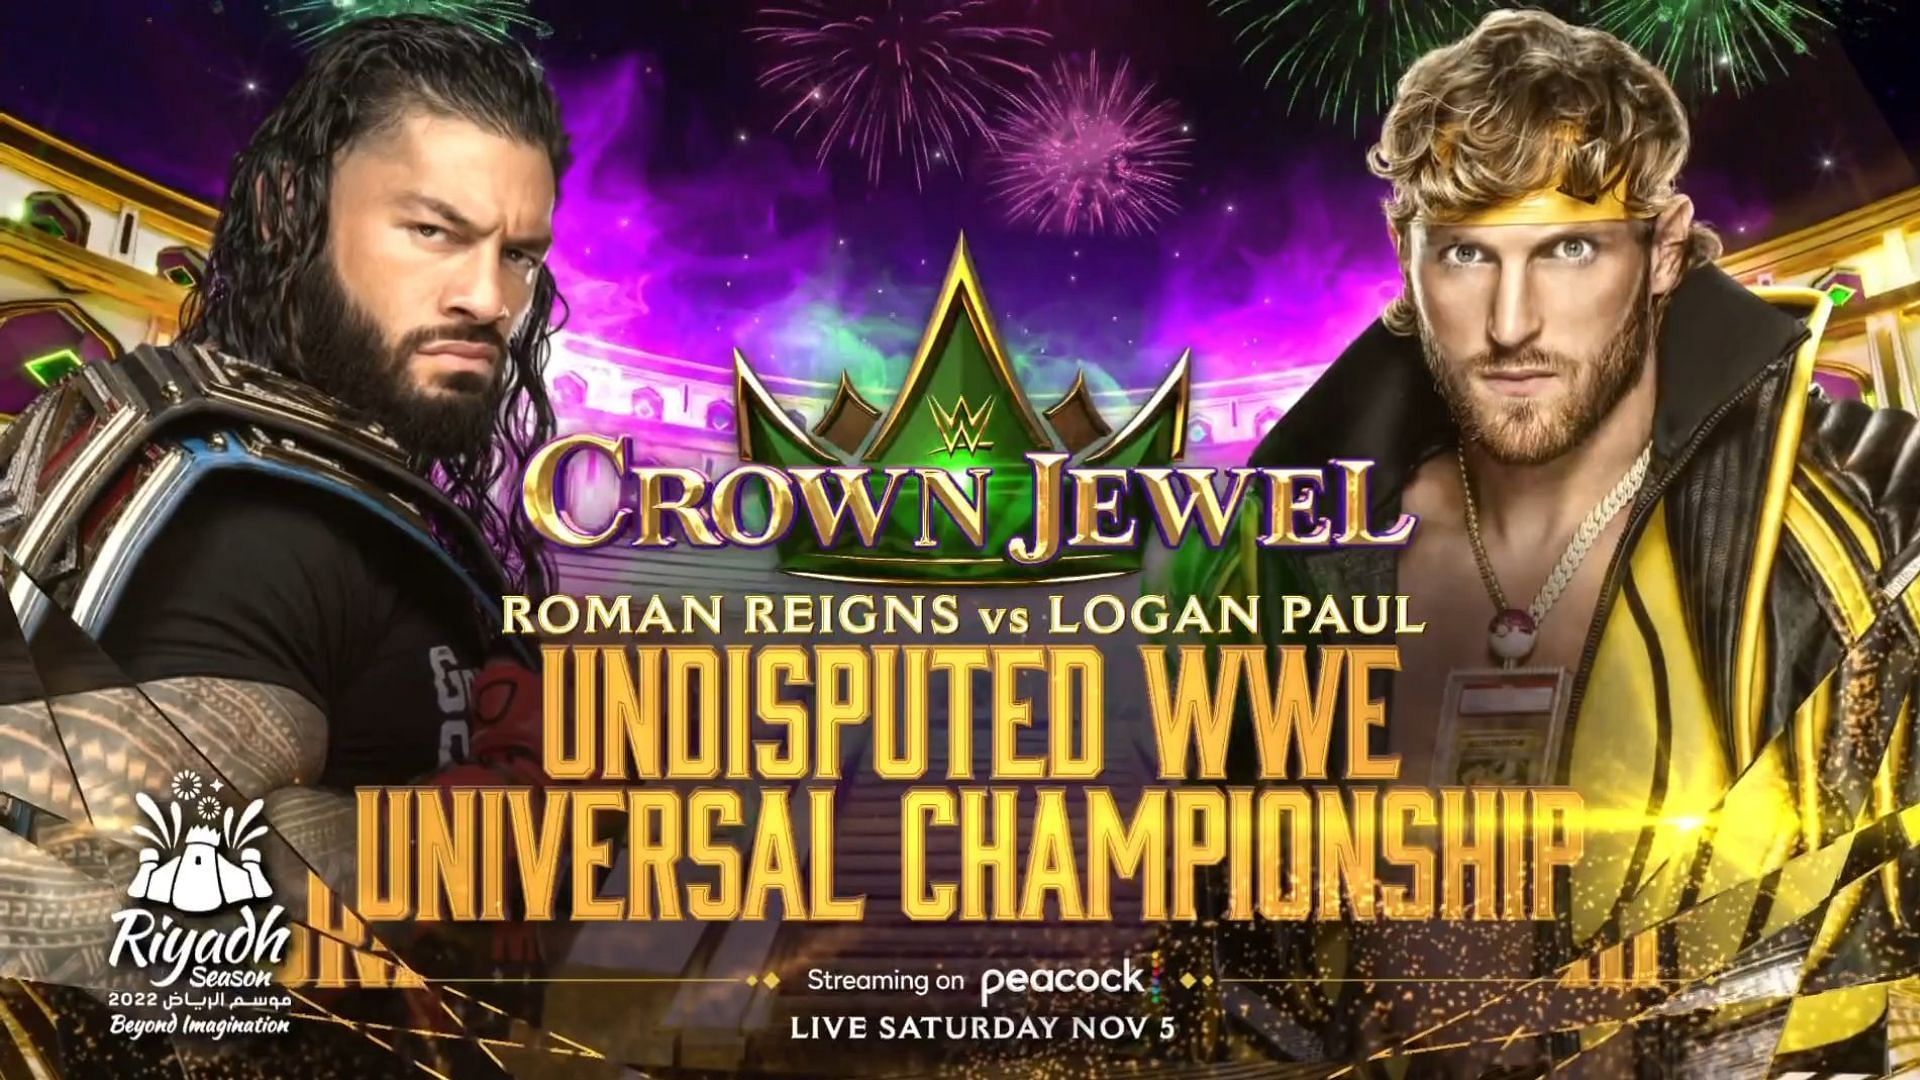 Warning of an "imminent attack" has been issued ahead of WWE Crown Jewel